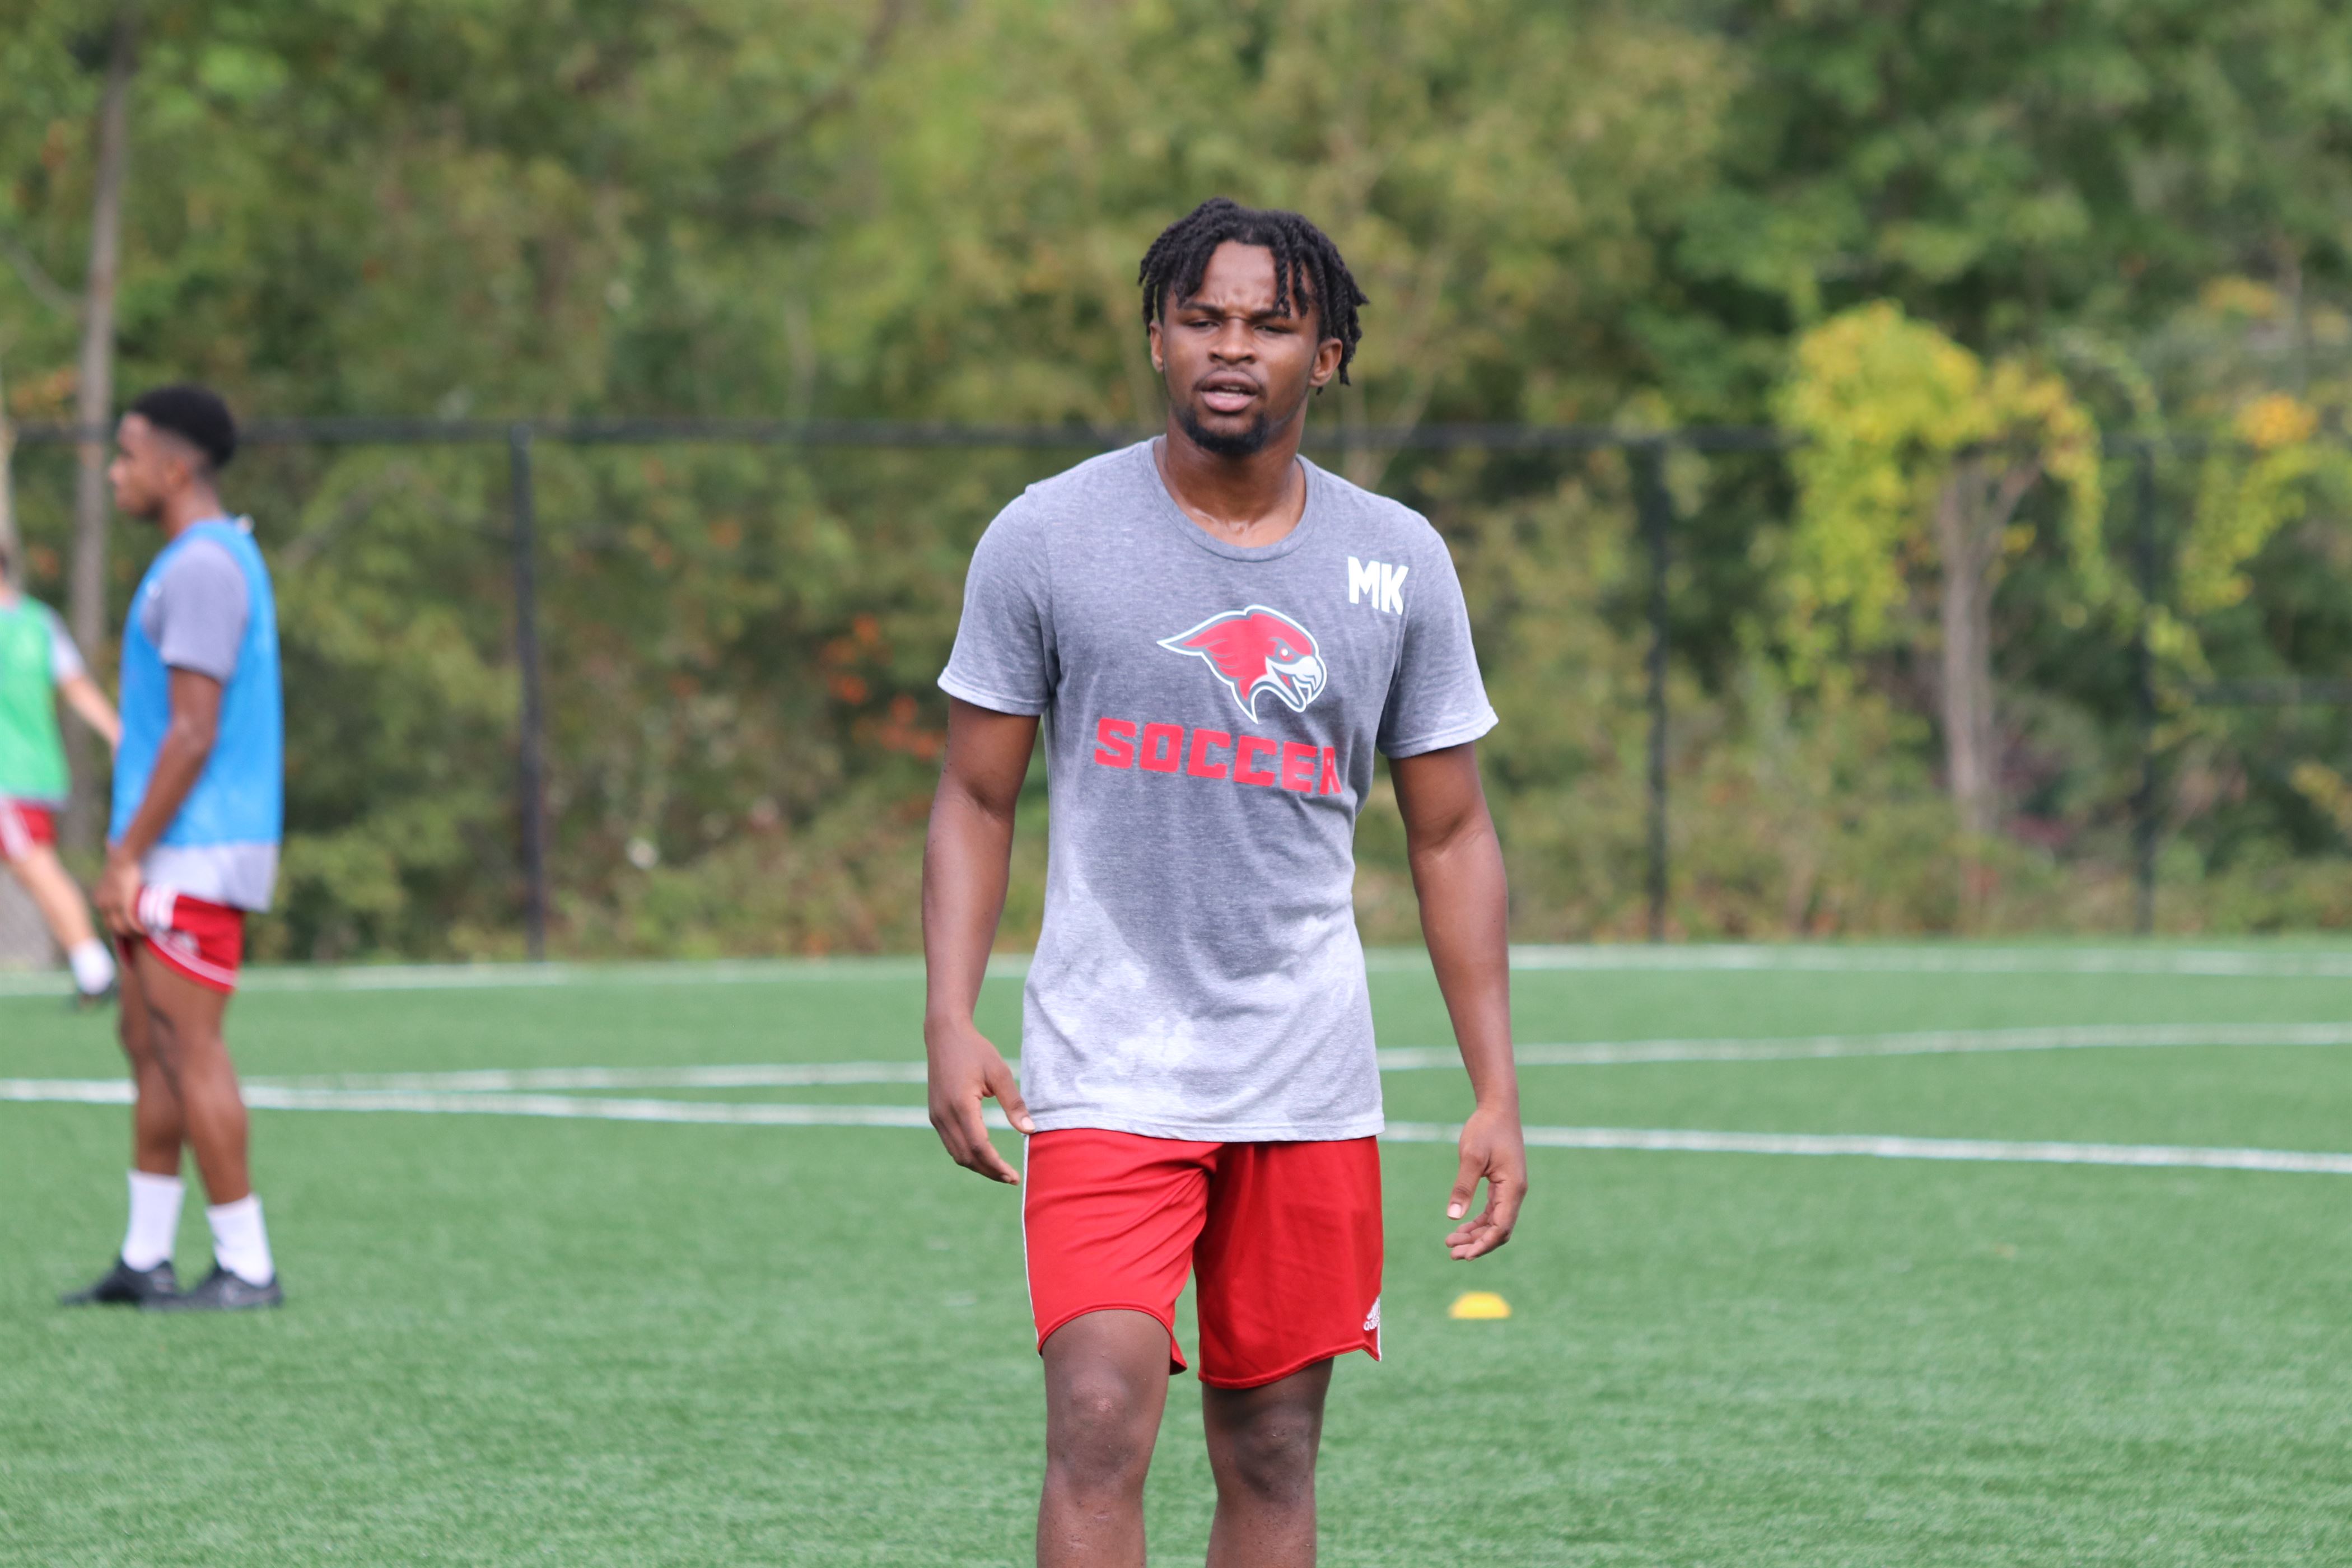 Michael Knapp was drafted in the 3rd round of the 2022 MLS SuperDraft. Photo courtesy of Michael Knapp